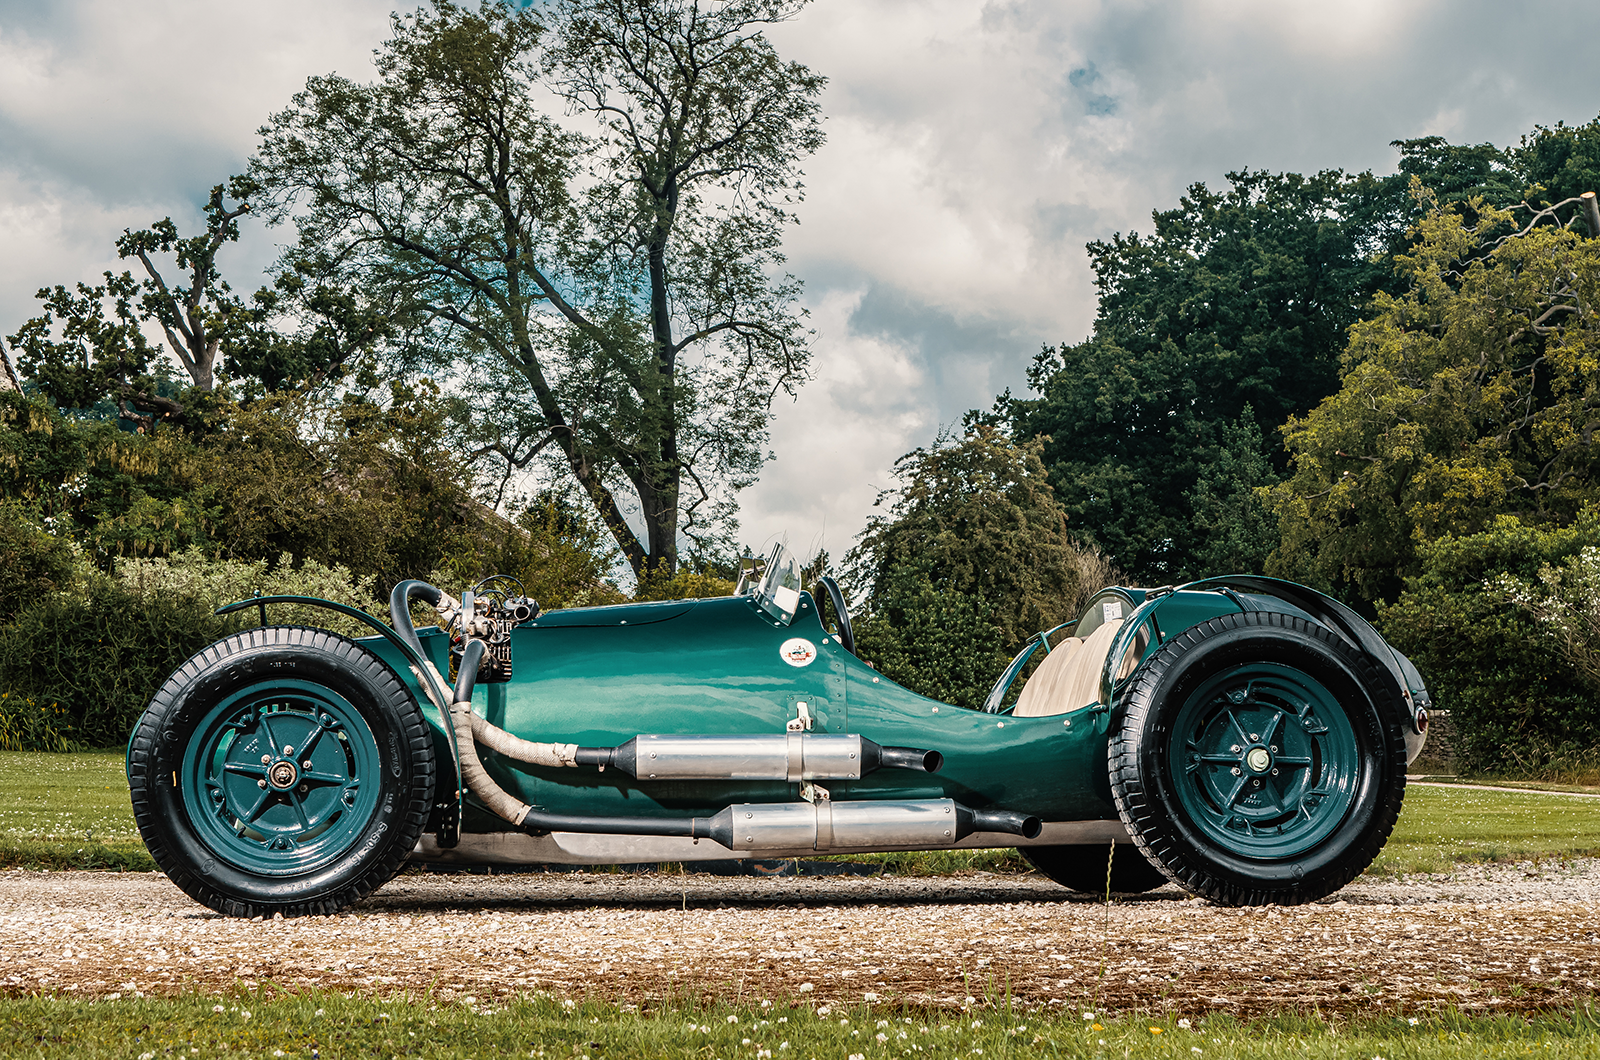 Classic & Sports Car – Ever dreamed of owning the first Lister? Now you can...